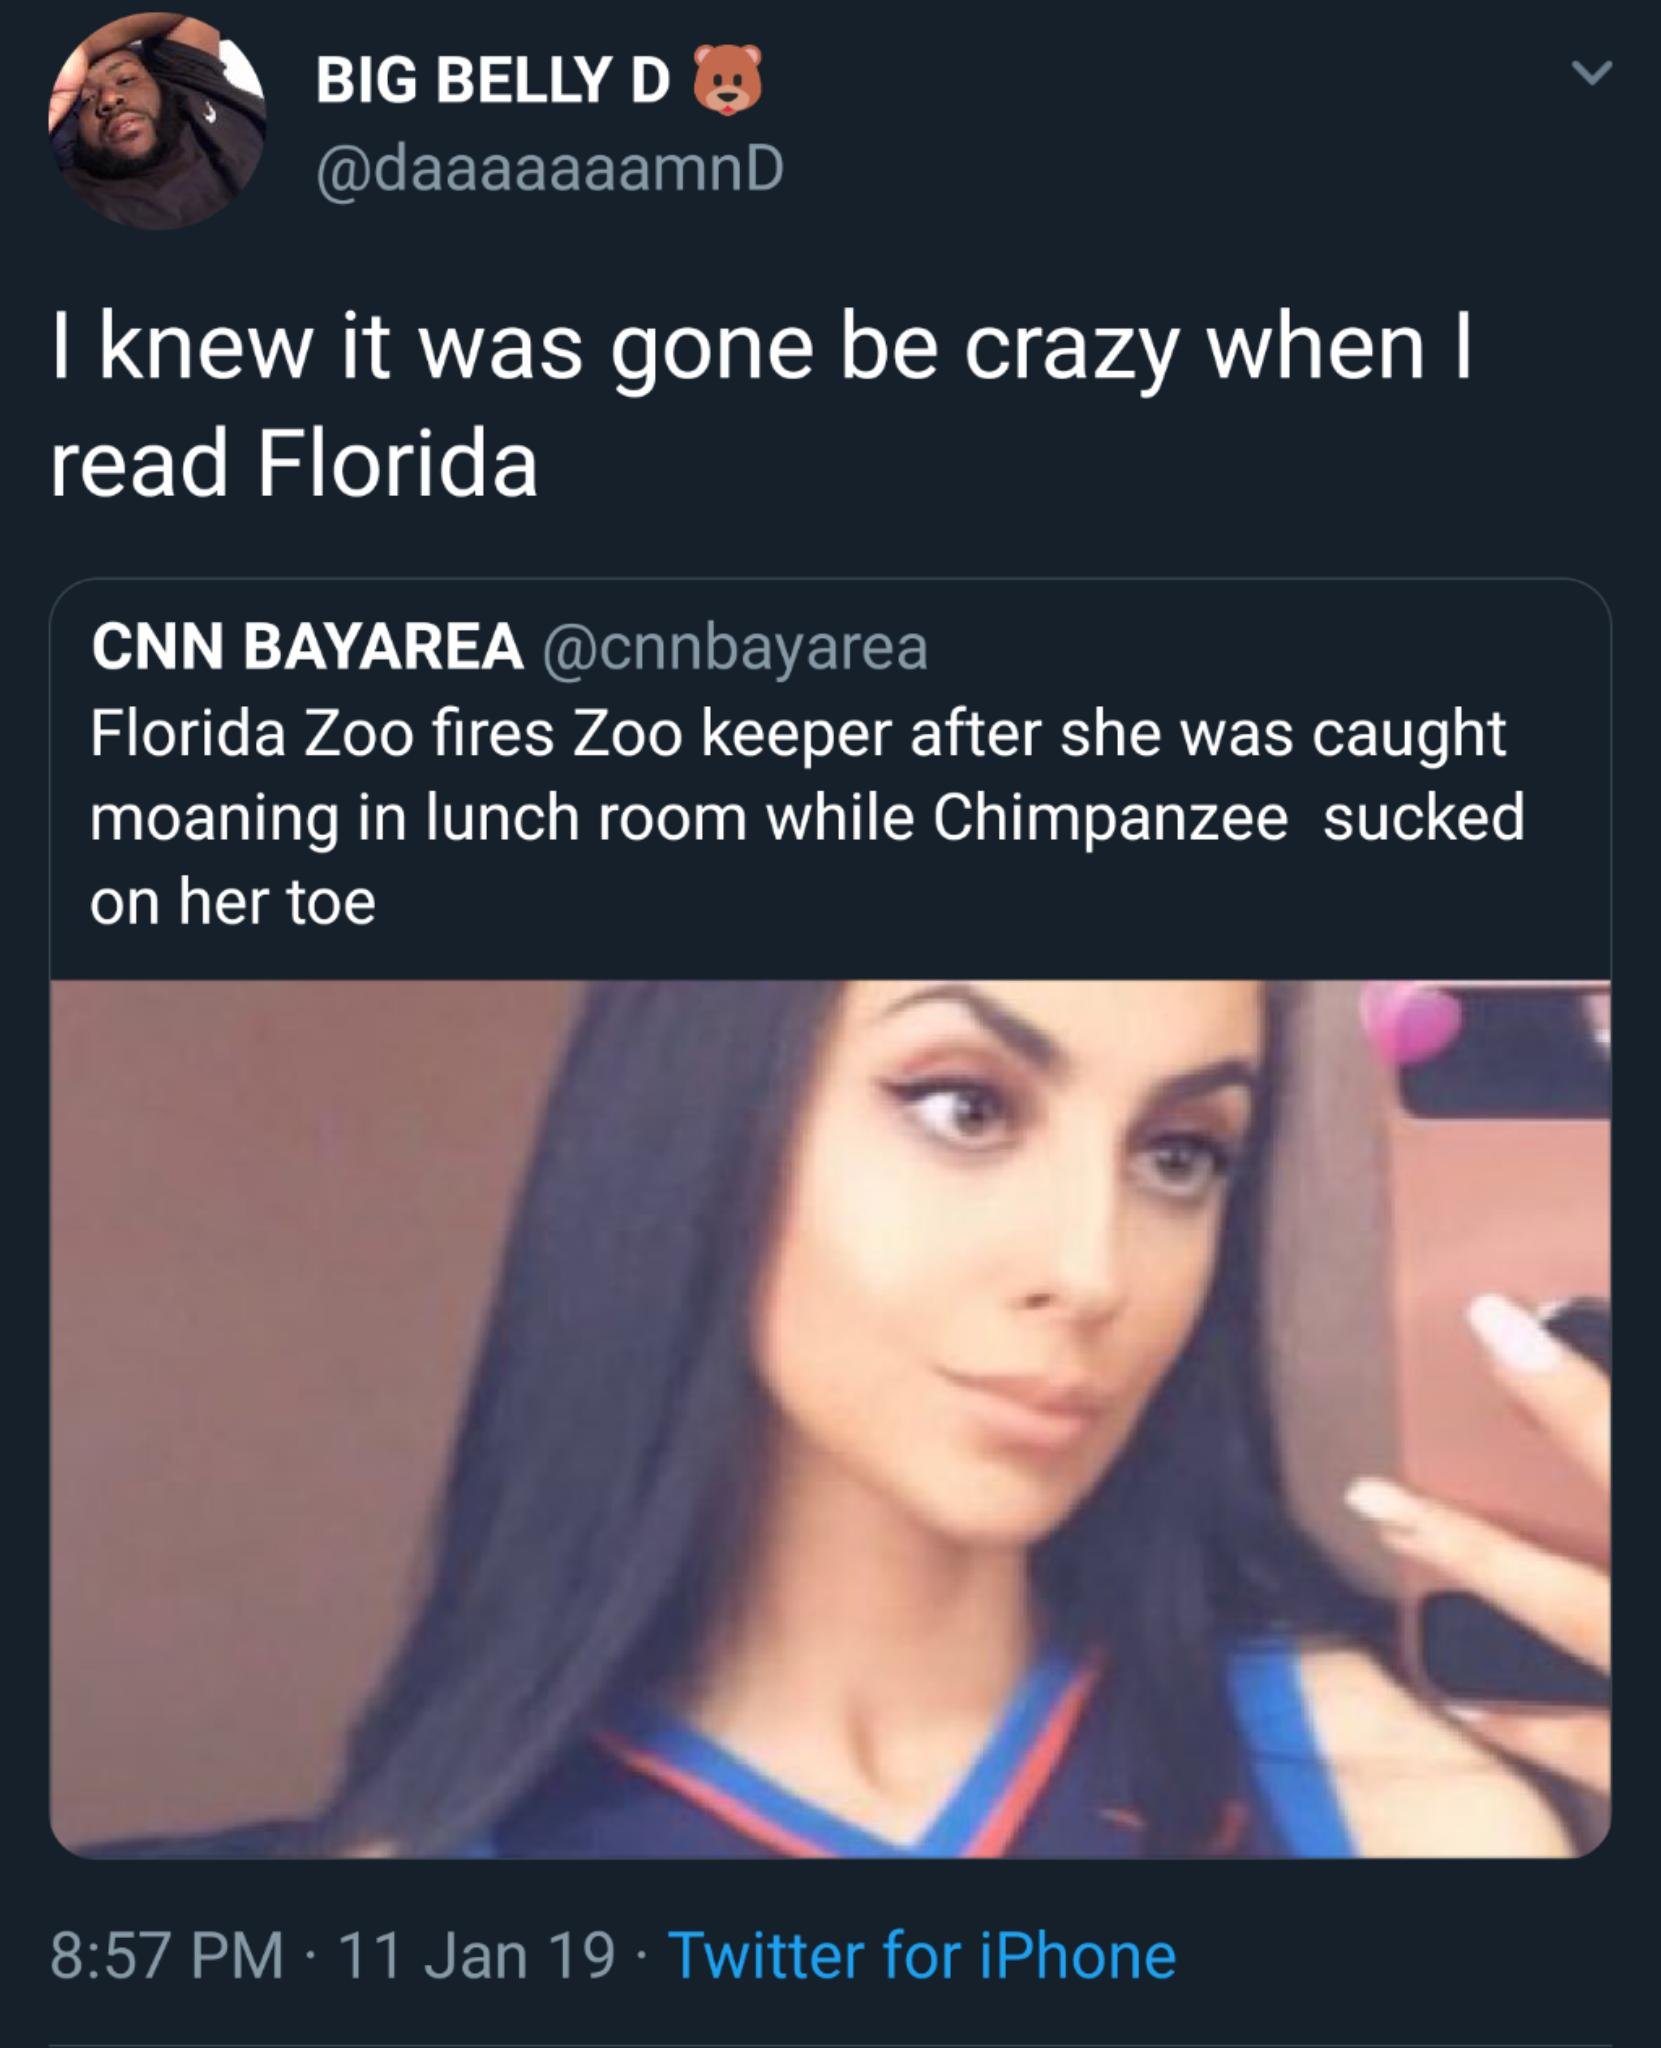 funny meme of florida zoo keeper chimpanzee - Big Belly Do I knew it was gone be crazy when I read Florida Cnn Bayarea Florida Zoo fires Zoo keeper after she was caught moaning in lunch room while Chimpanzee sucked on her toe 11 Jan 19 Twitter for iPhone